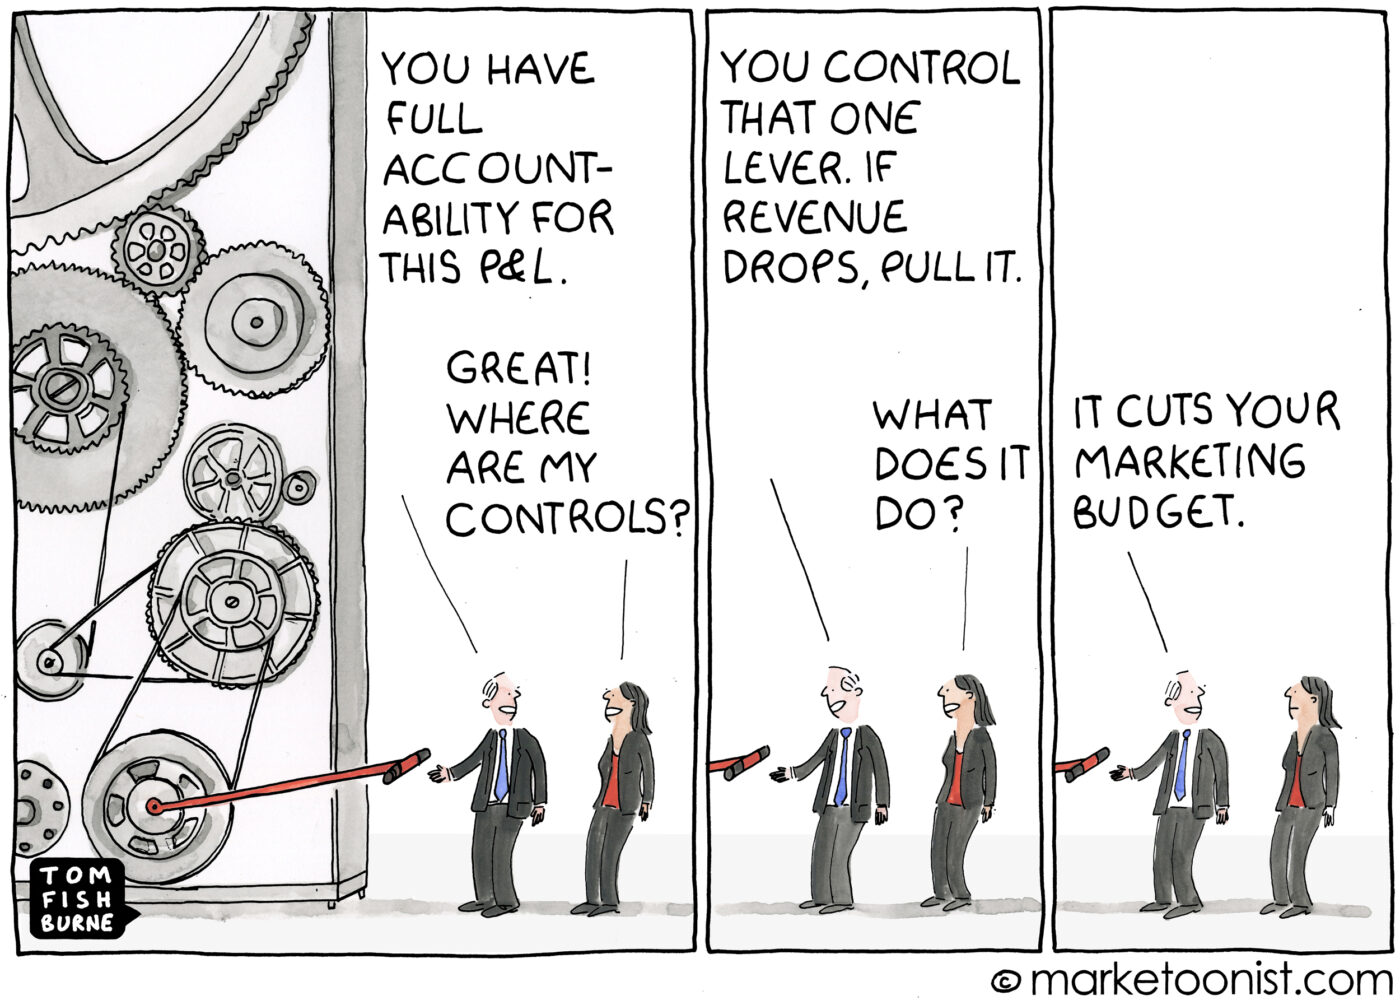 marketoonist comic strip showing a man telling a person to cut marketing spend when revenue drops 